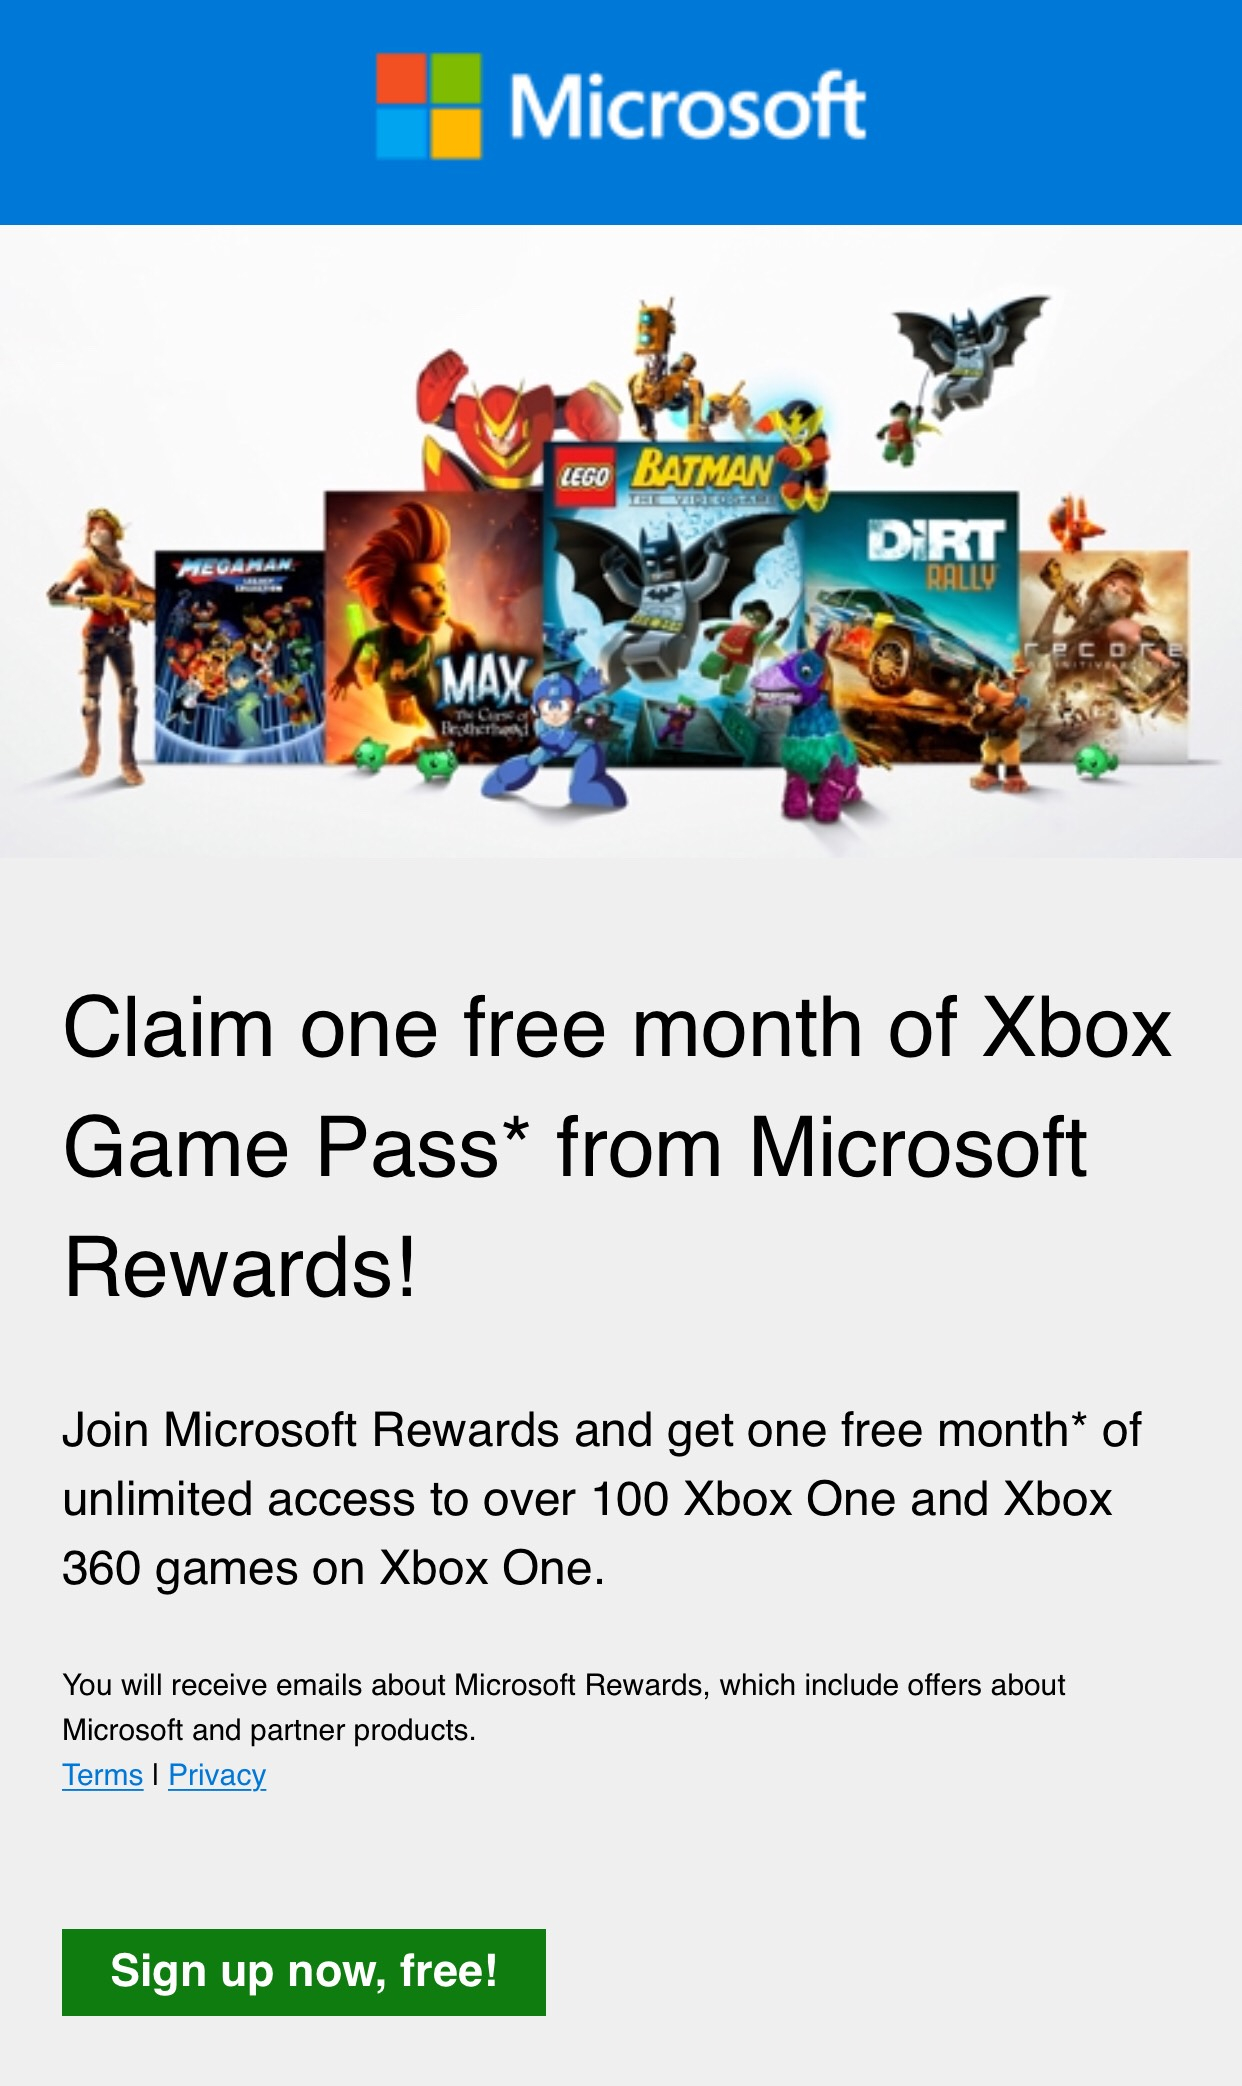 Xbox says I don't own ultimate gamepass when I do - Microsoft